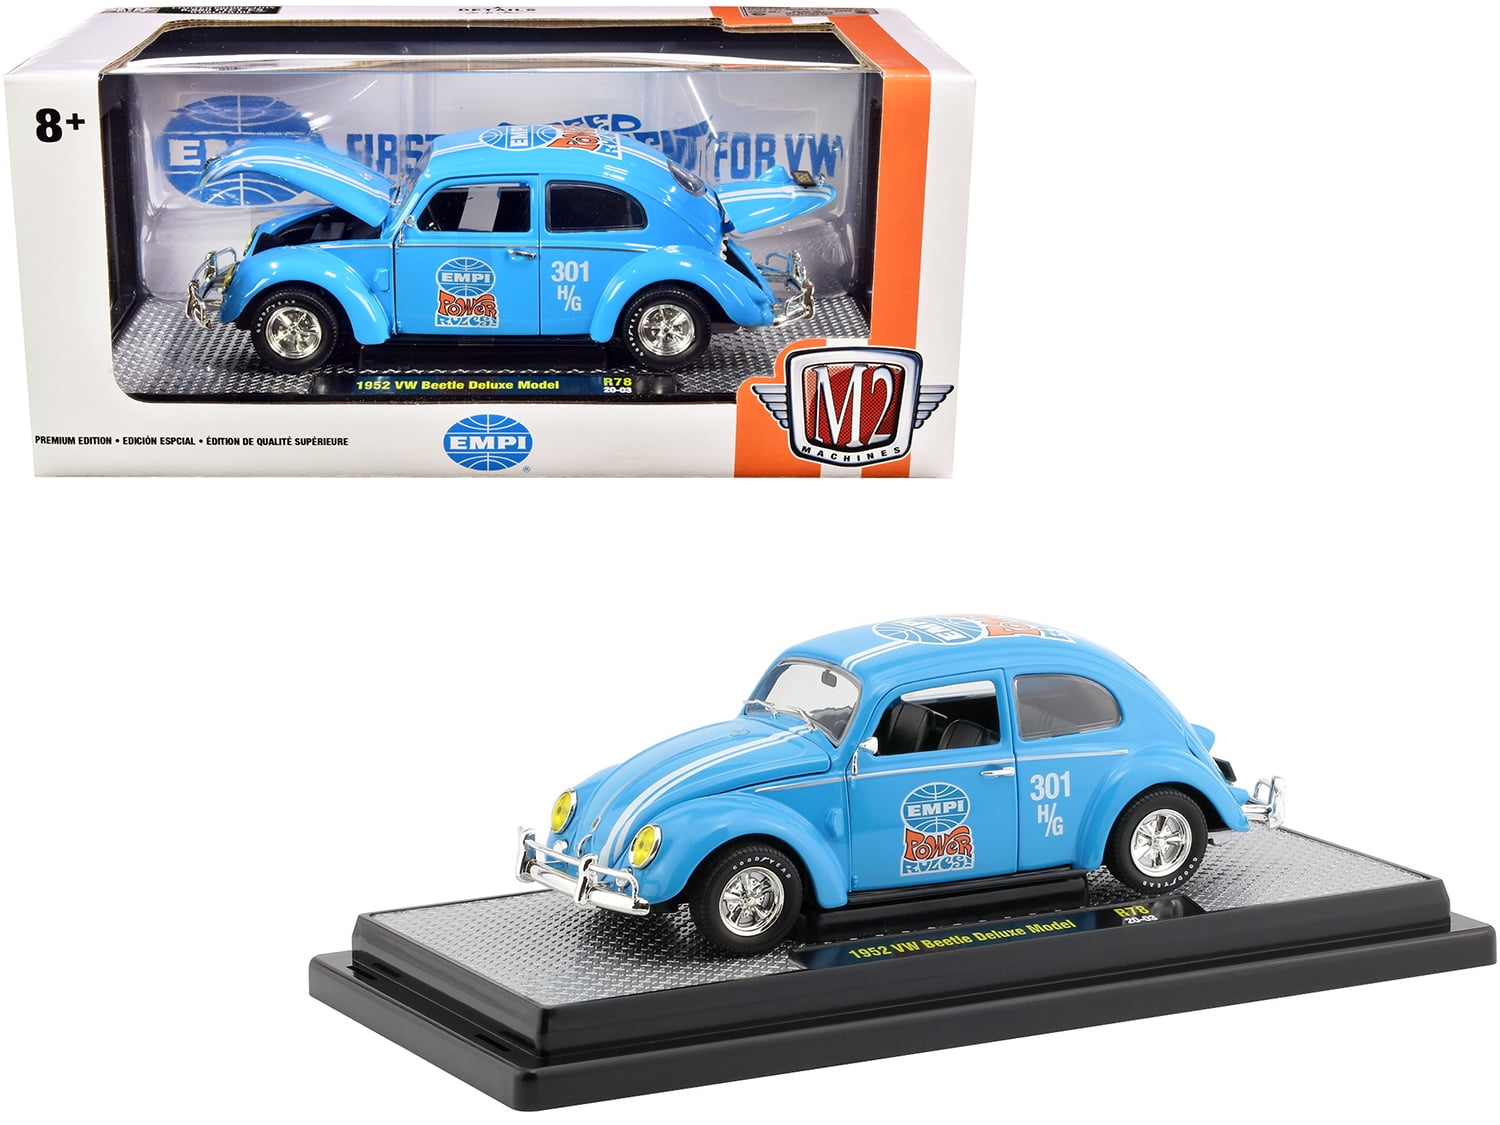 Details about   M2 Machines Sprite 1967 VW Beetle Deluxe USA Model SP01 Limited Free Shipping